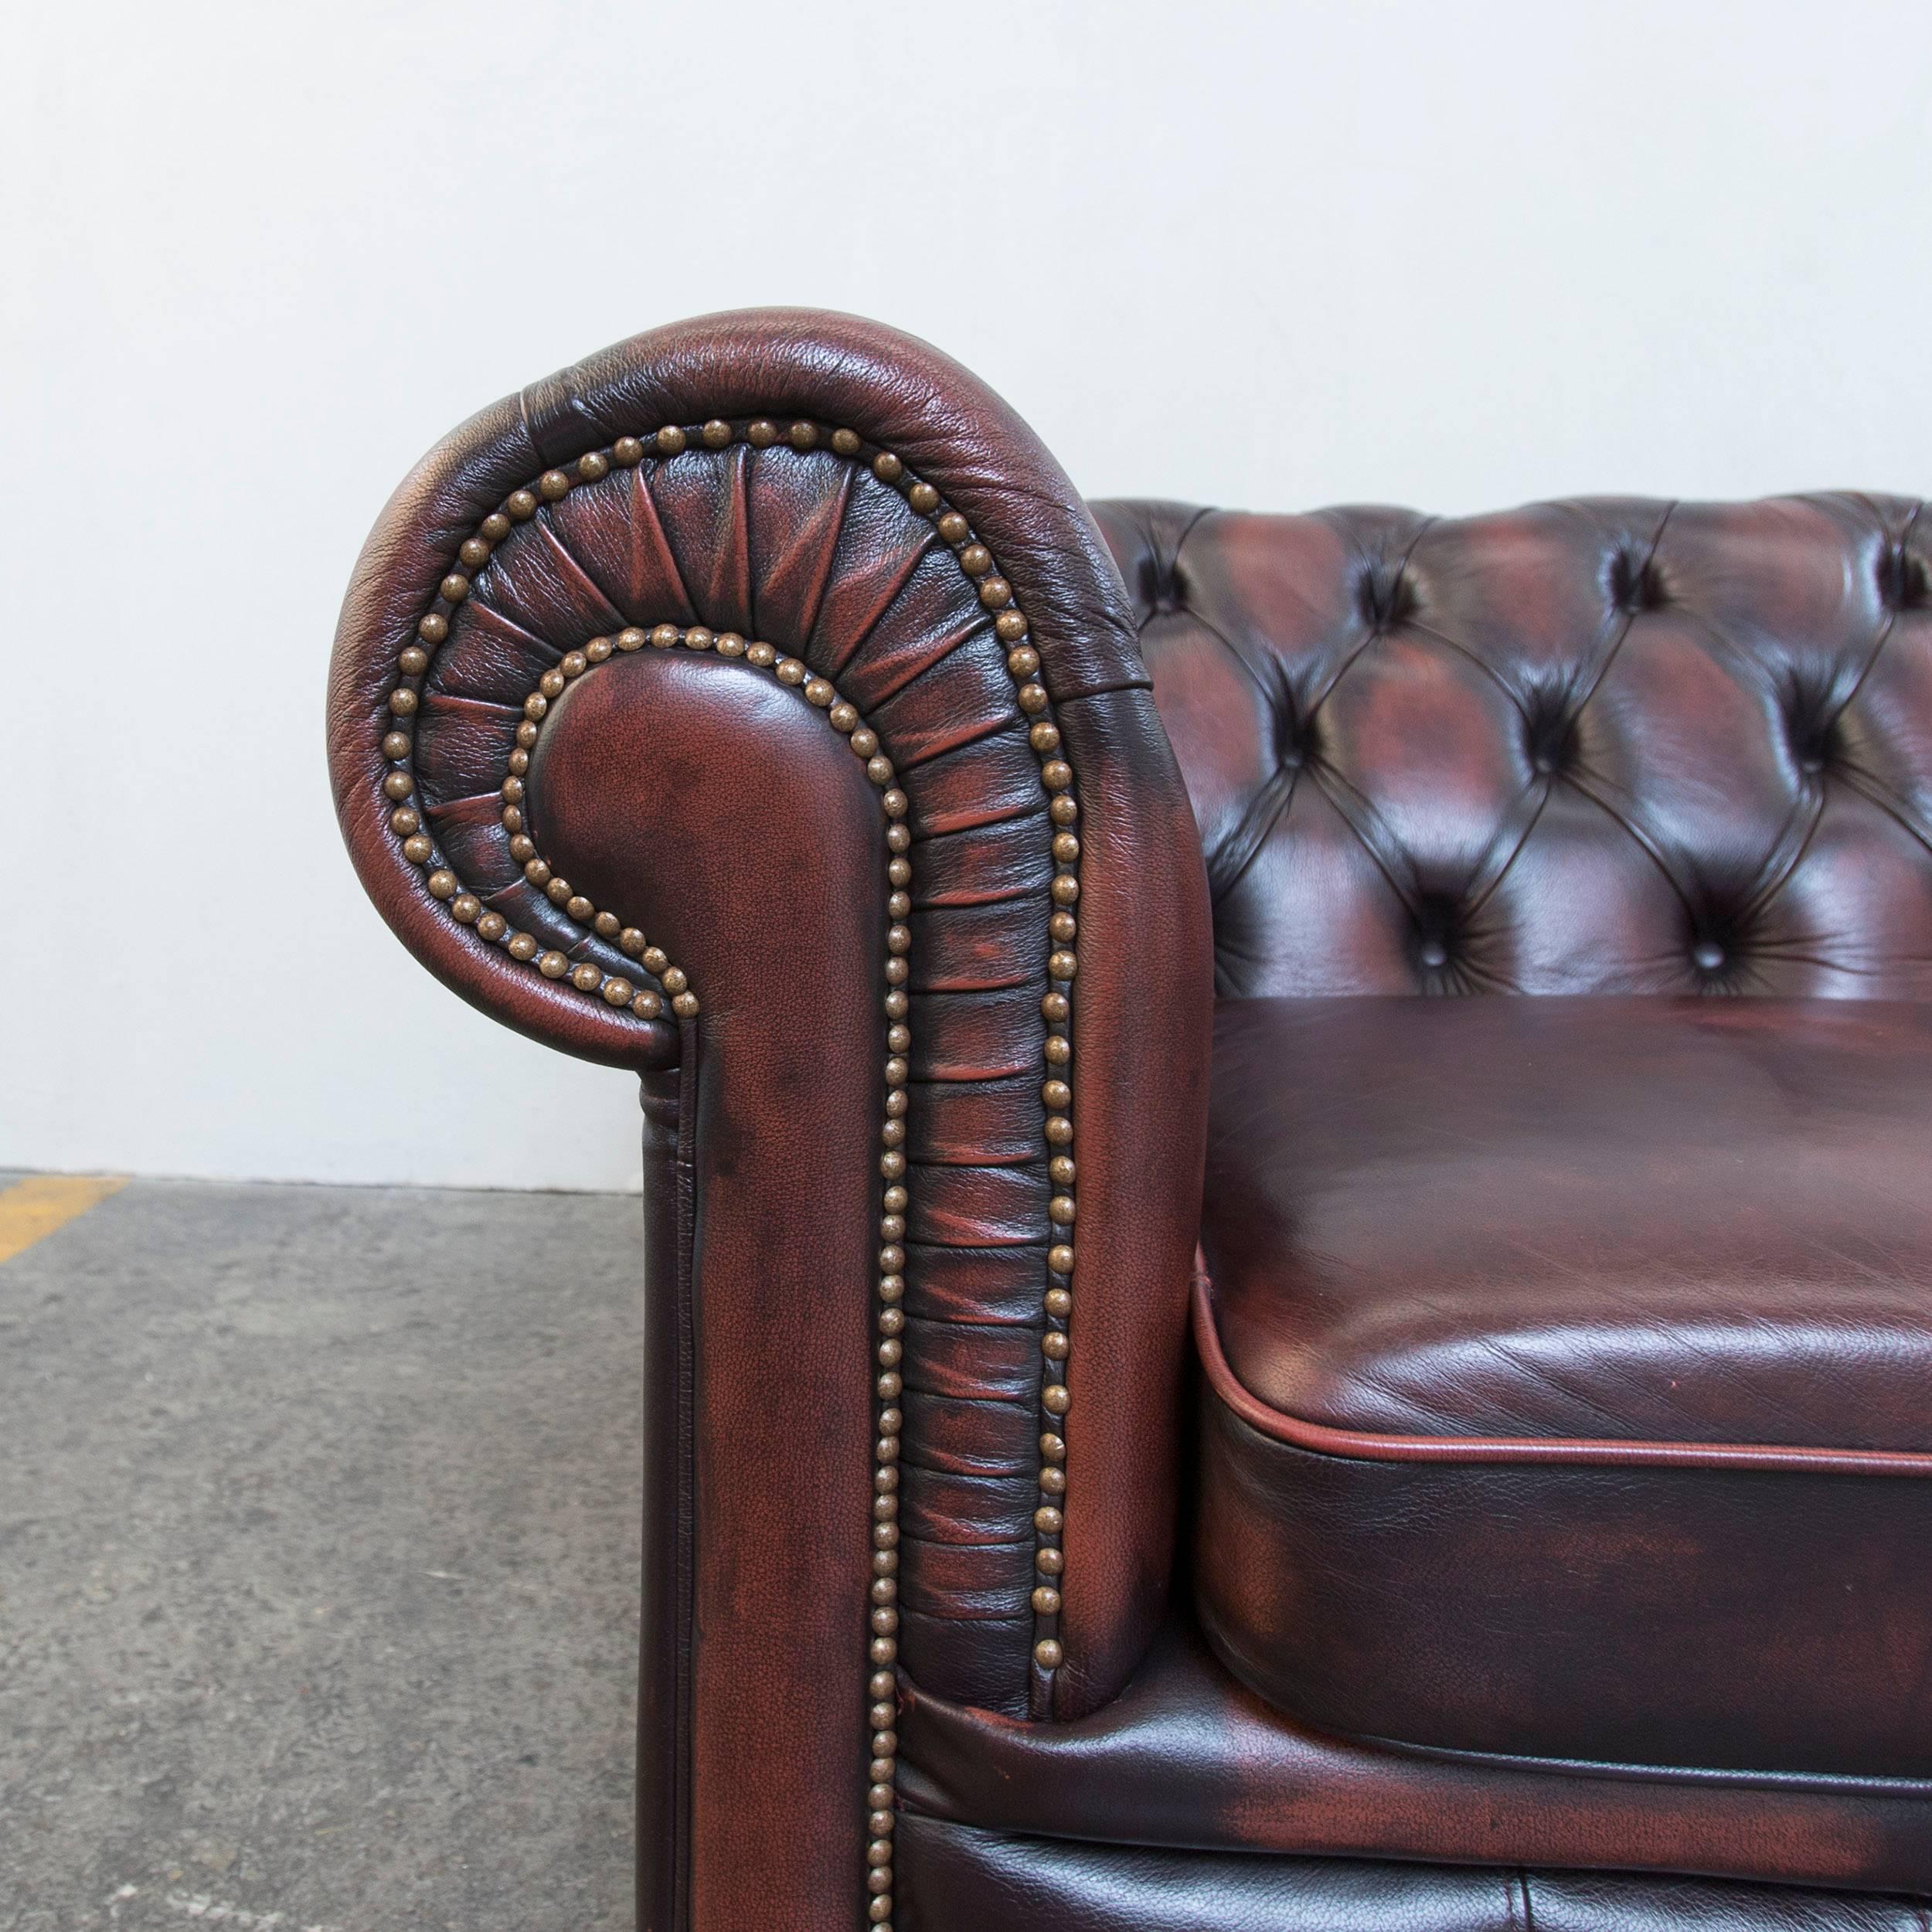 Brown colored original Chesterfield leather sofa in a vintage style made for pure comfort and elegance.